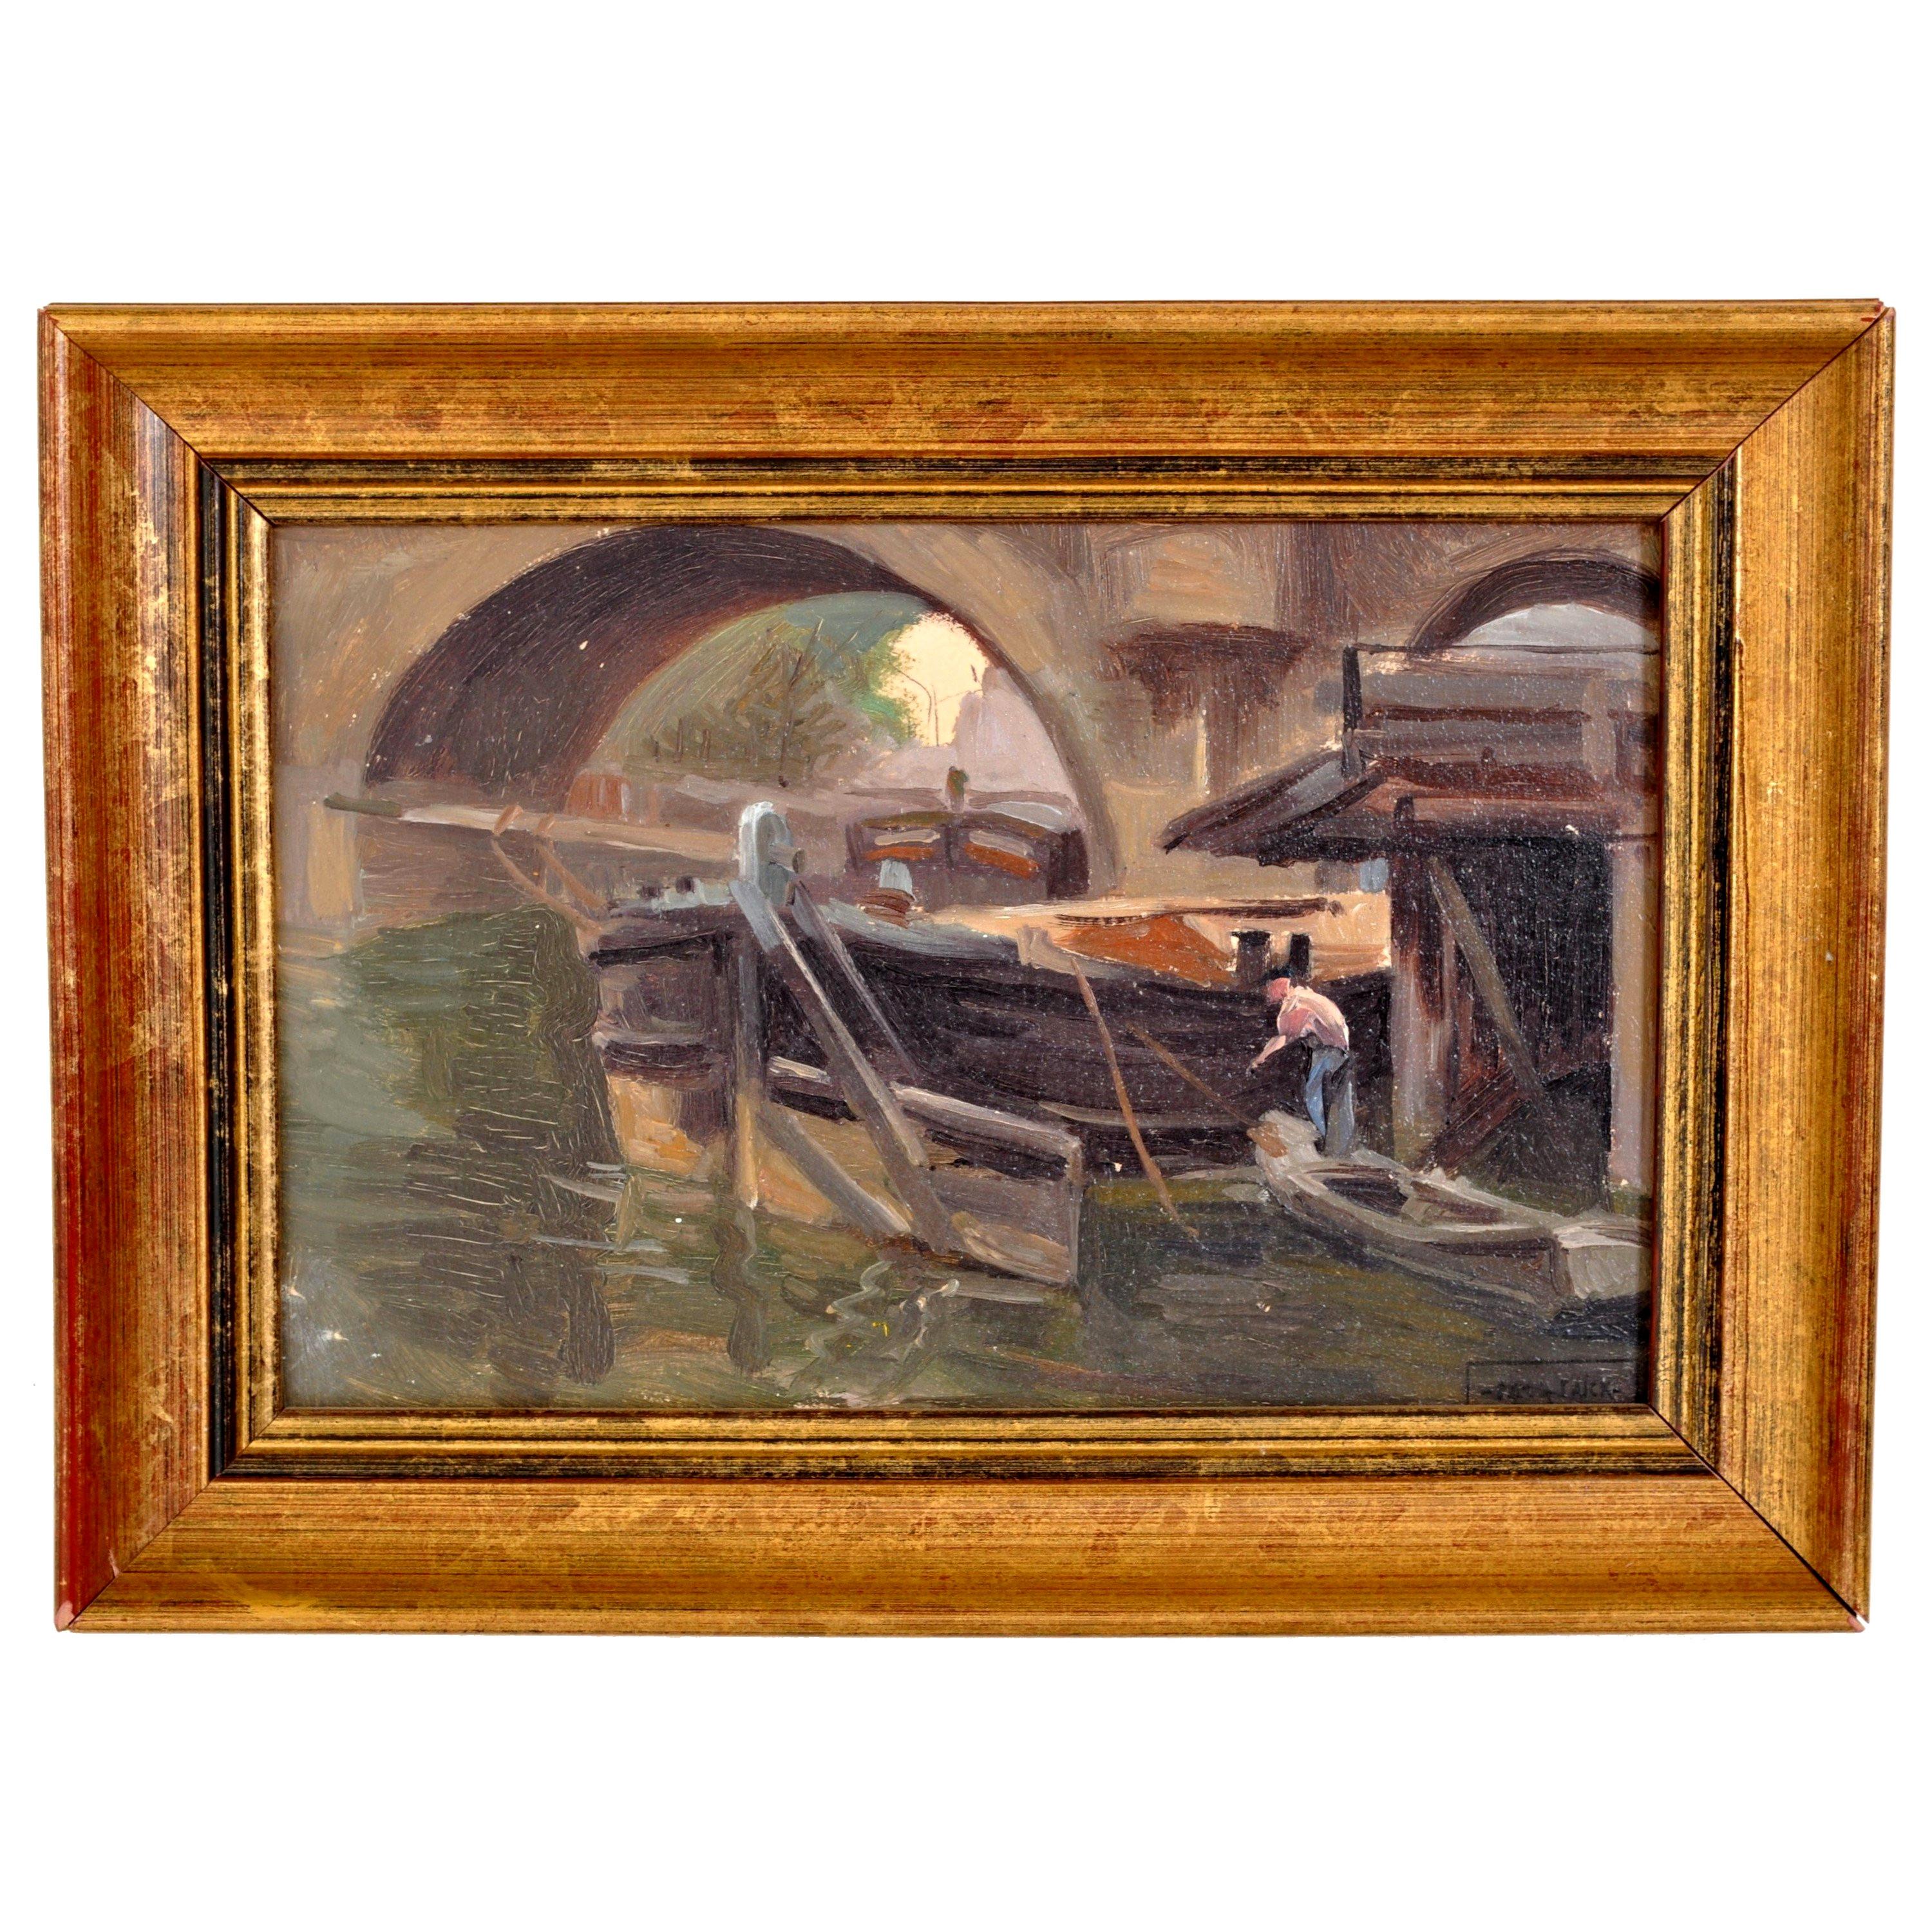  Antique French Impressionist Oil Painting Boat on the Seine Paul de Frick 1900